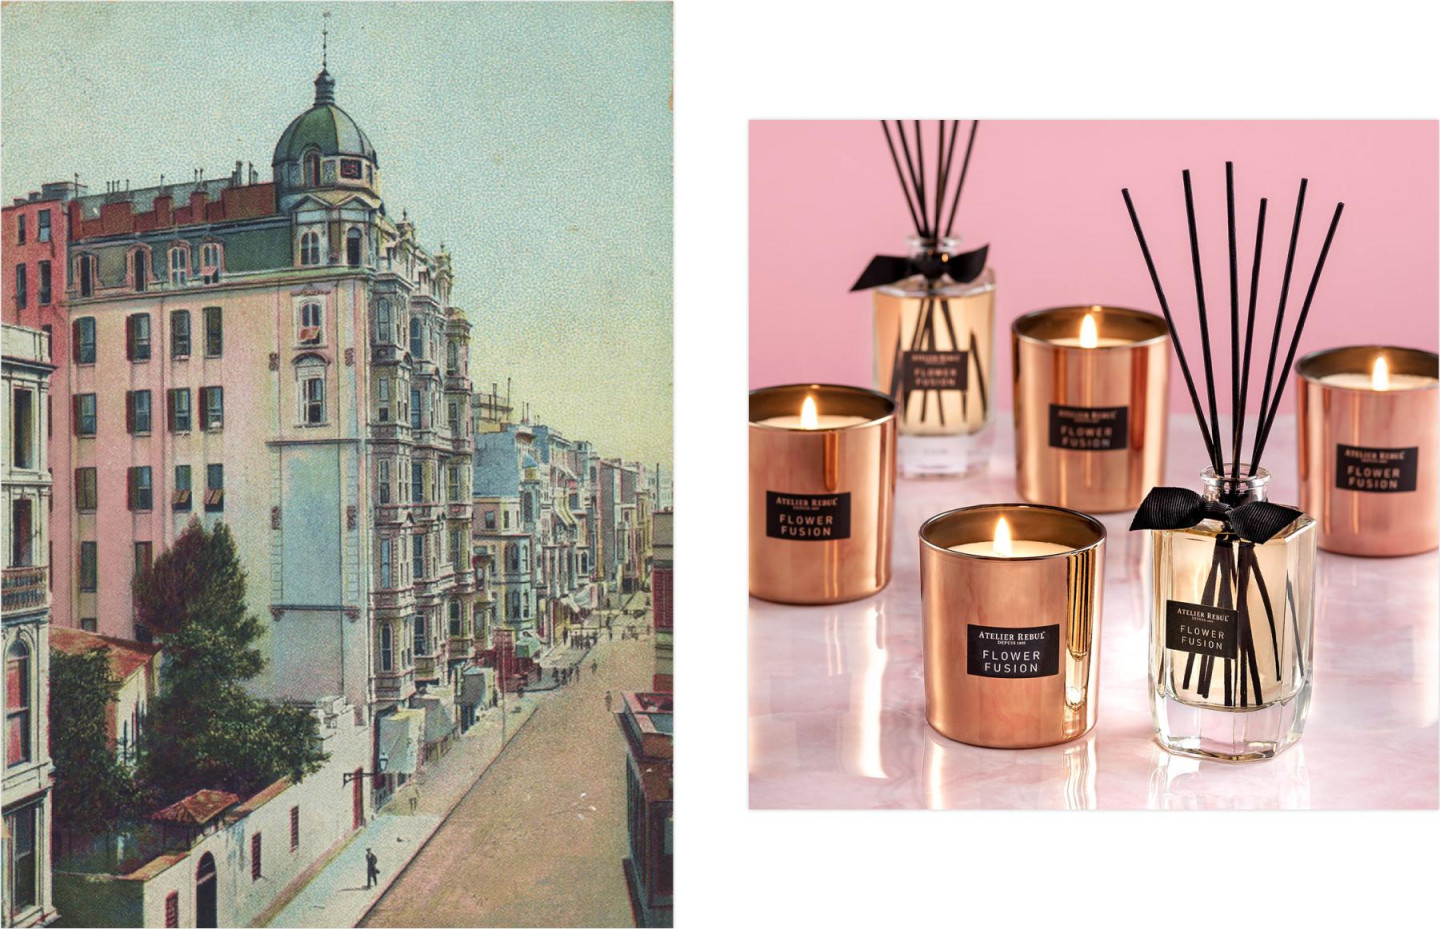 Seven interesting facts about the perfume brand Atelier Rebul